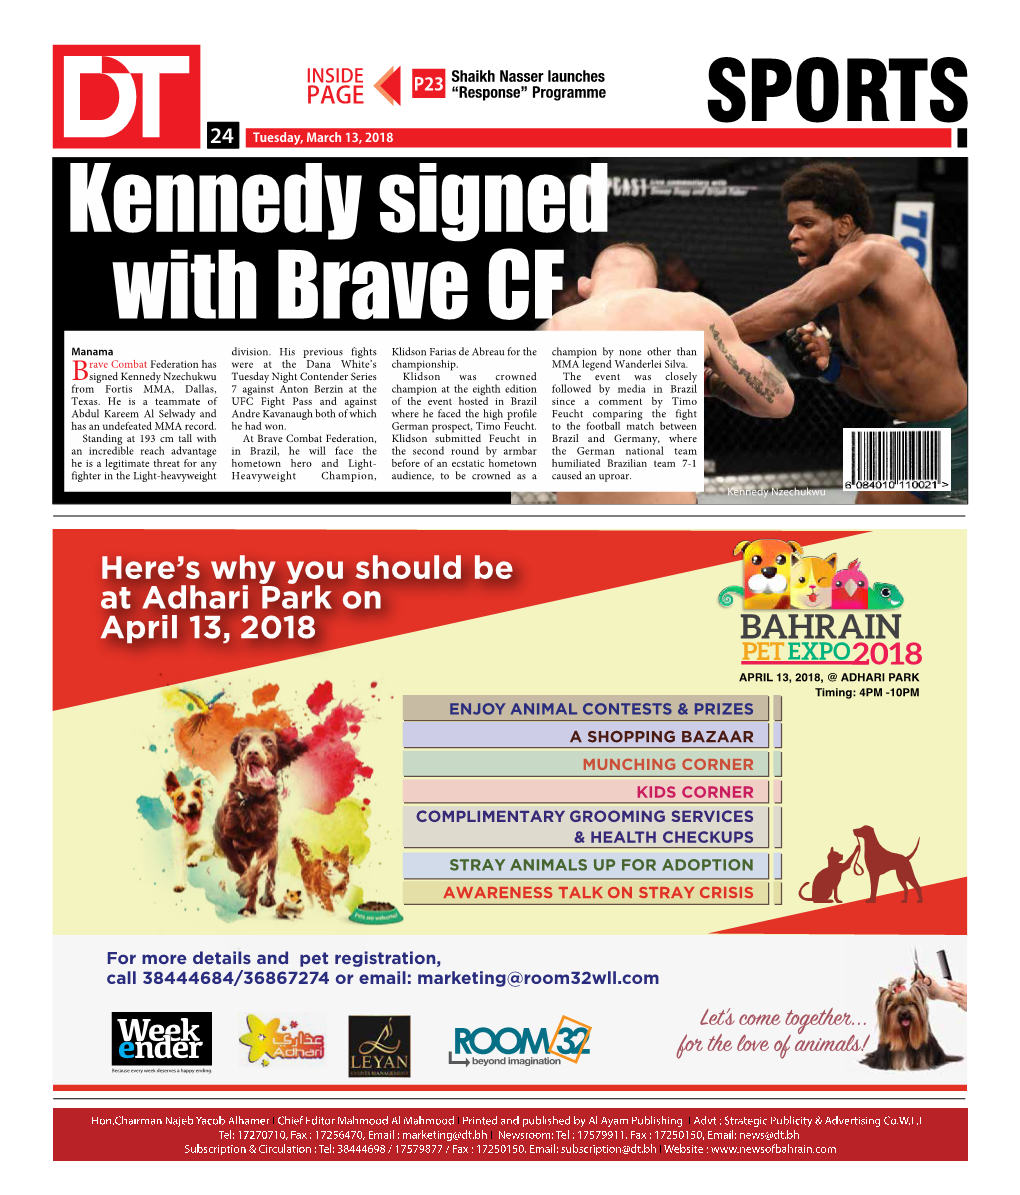 SPORTS 2424 Tuesday, March 13, 2018 Kennedy Signed with Brave CF Manama Division